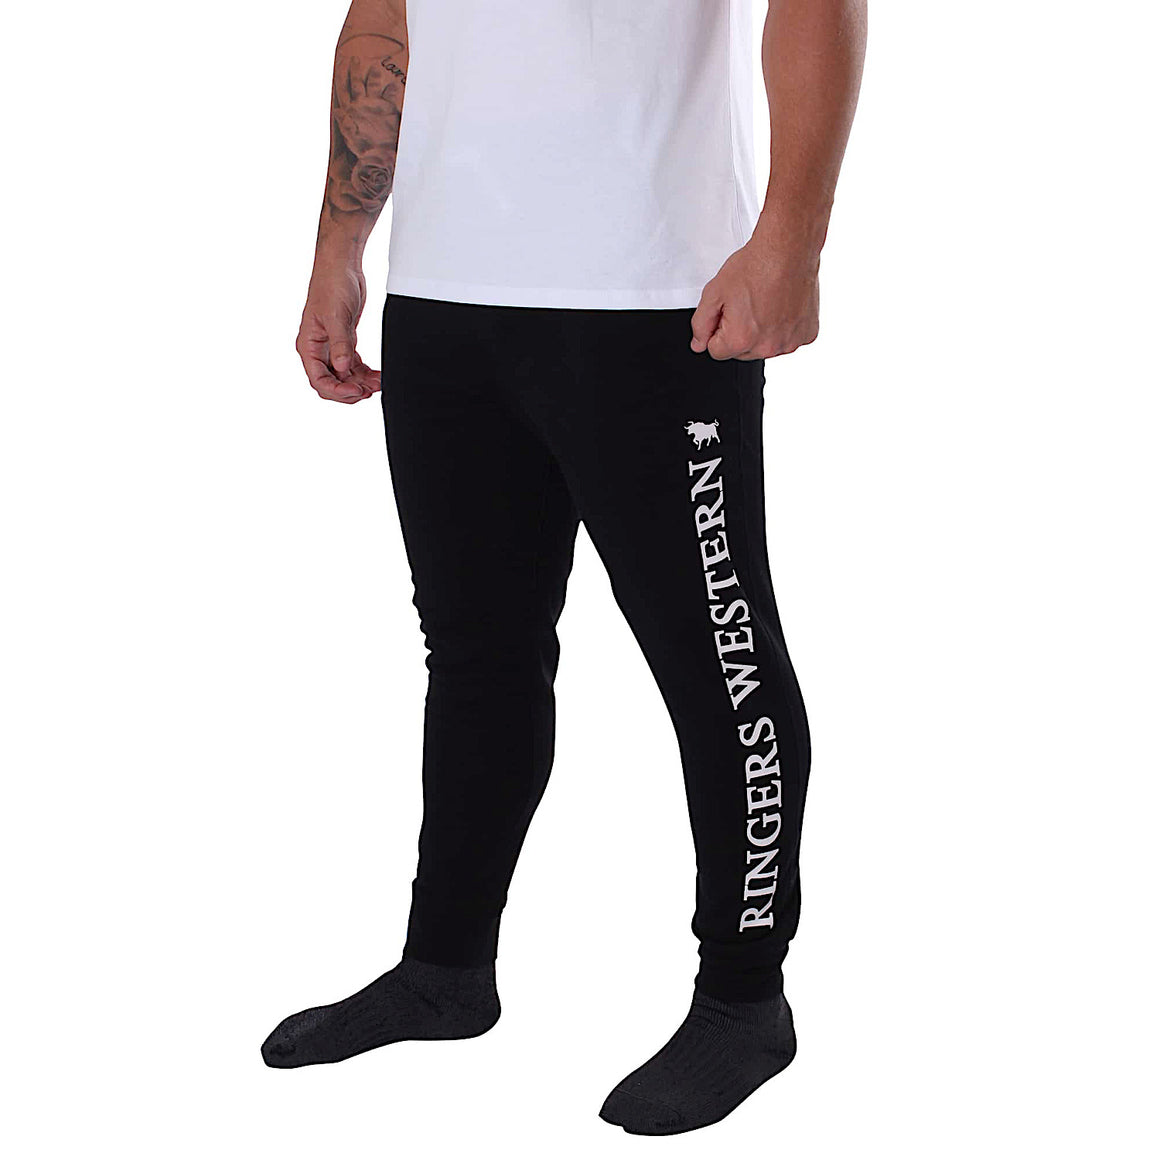 Ringers Western Texas Men's Trackpants - Black with White Print